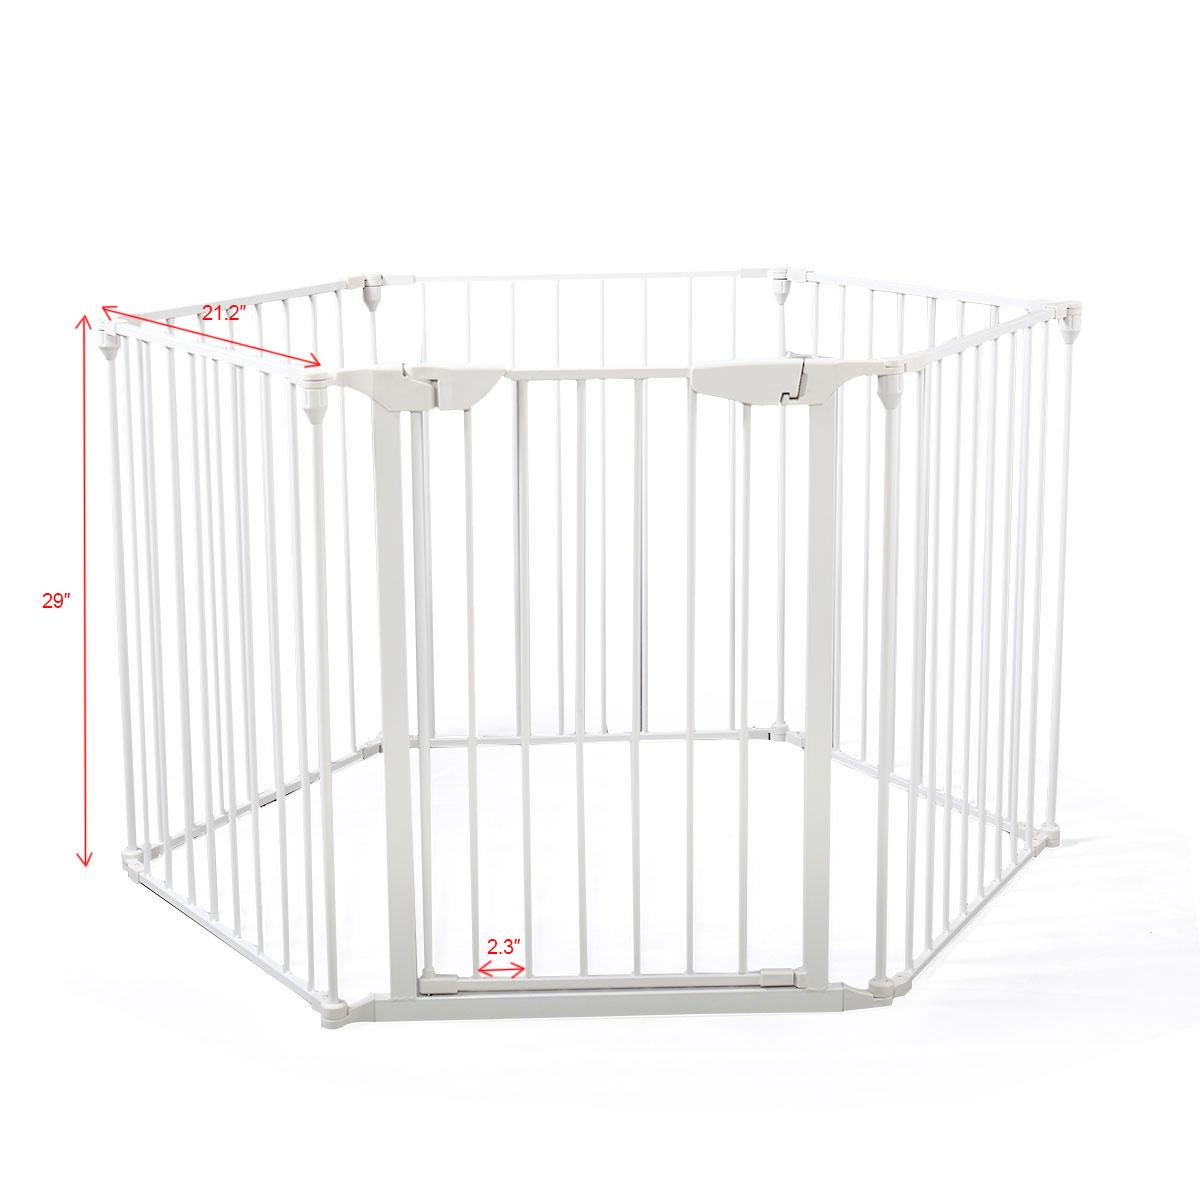 6-Panel Metal Baby Playpen Fireplace Safety Fence w/ Walk-Through Door in 2 Directions, 5-in-1 Extra Wide Barrier Gate for Indoor Baby/ Pet /Christmas Tree, White